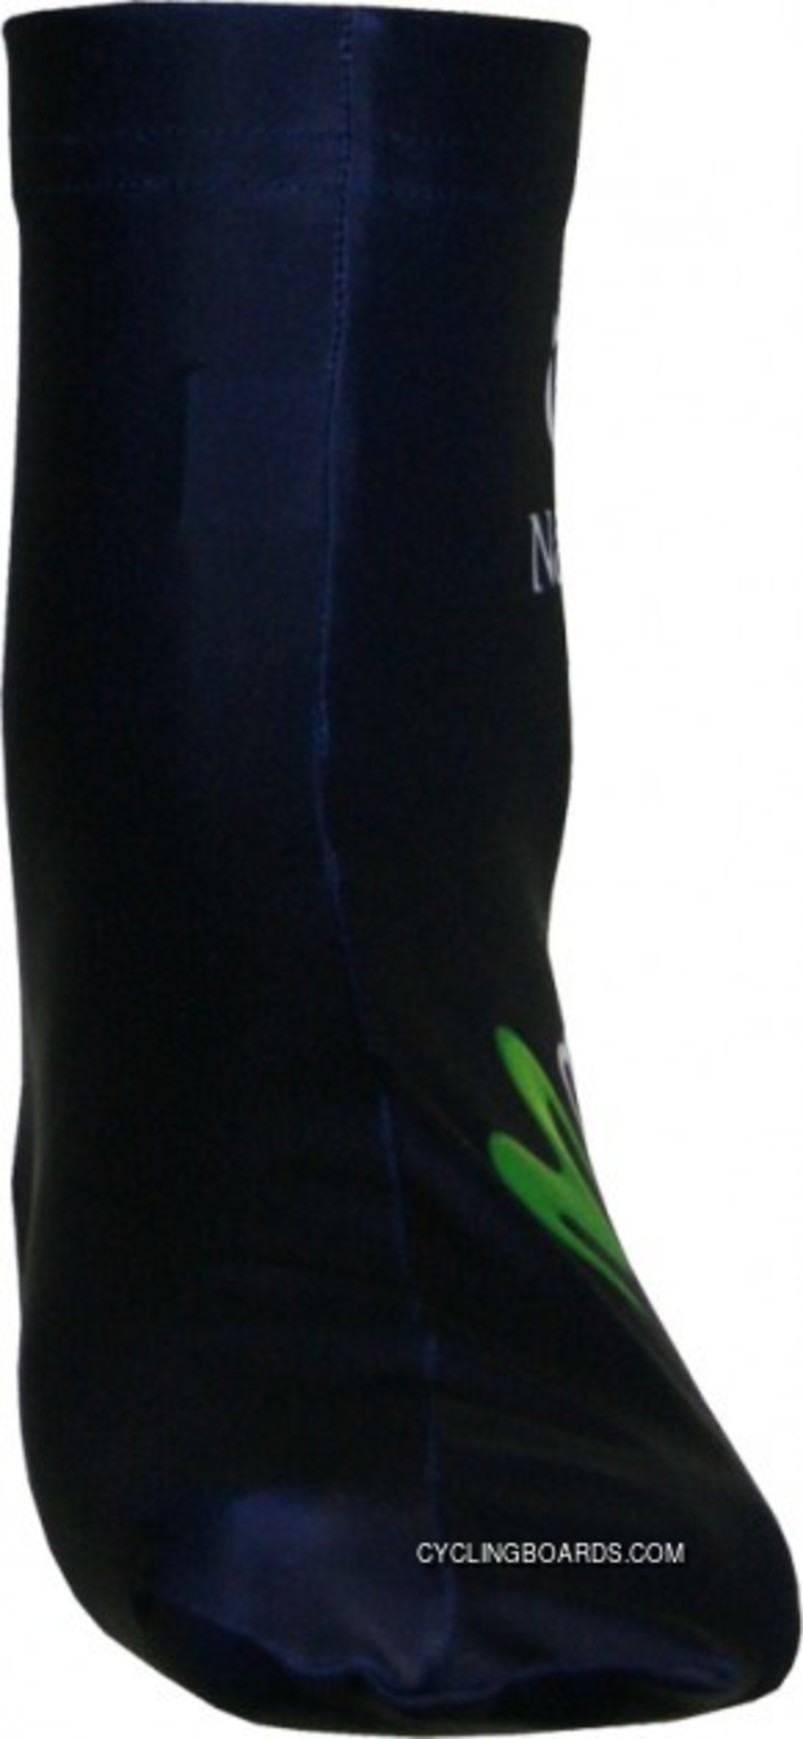 Best MOVISTAR 2013 Professional Cycling Team - Cycling Overshoeshoe Cover TJ-059-2644